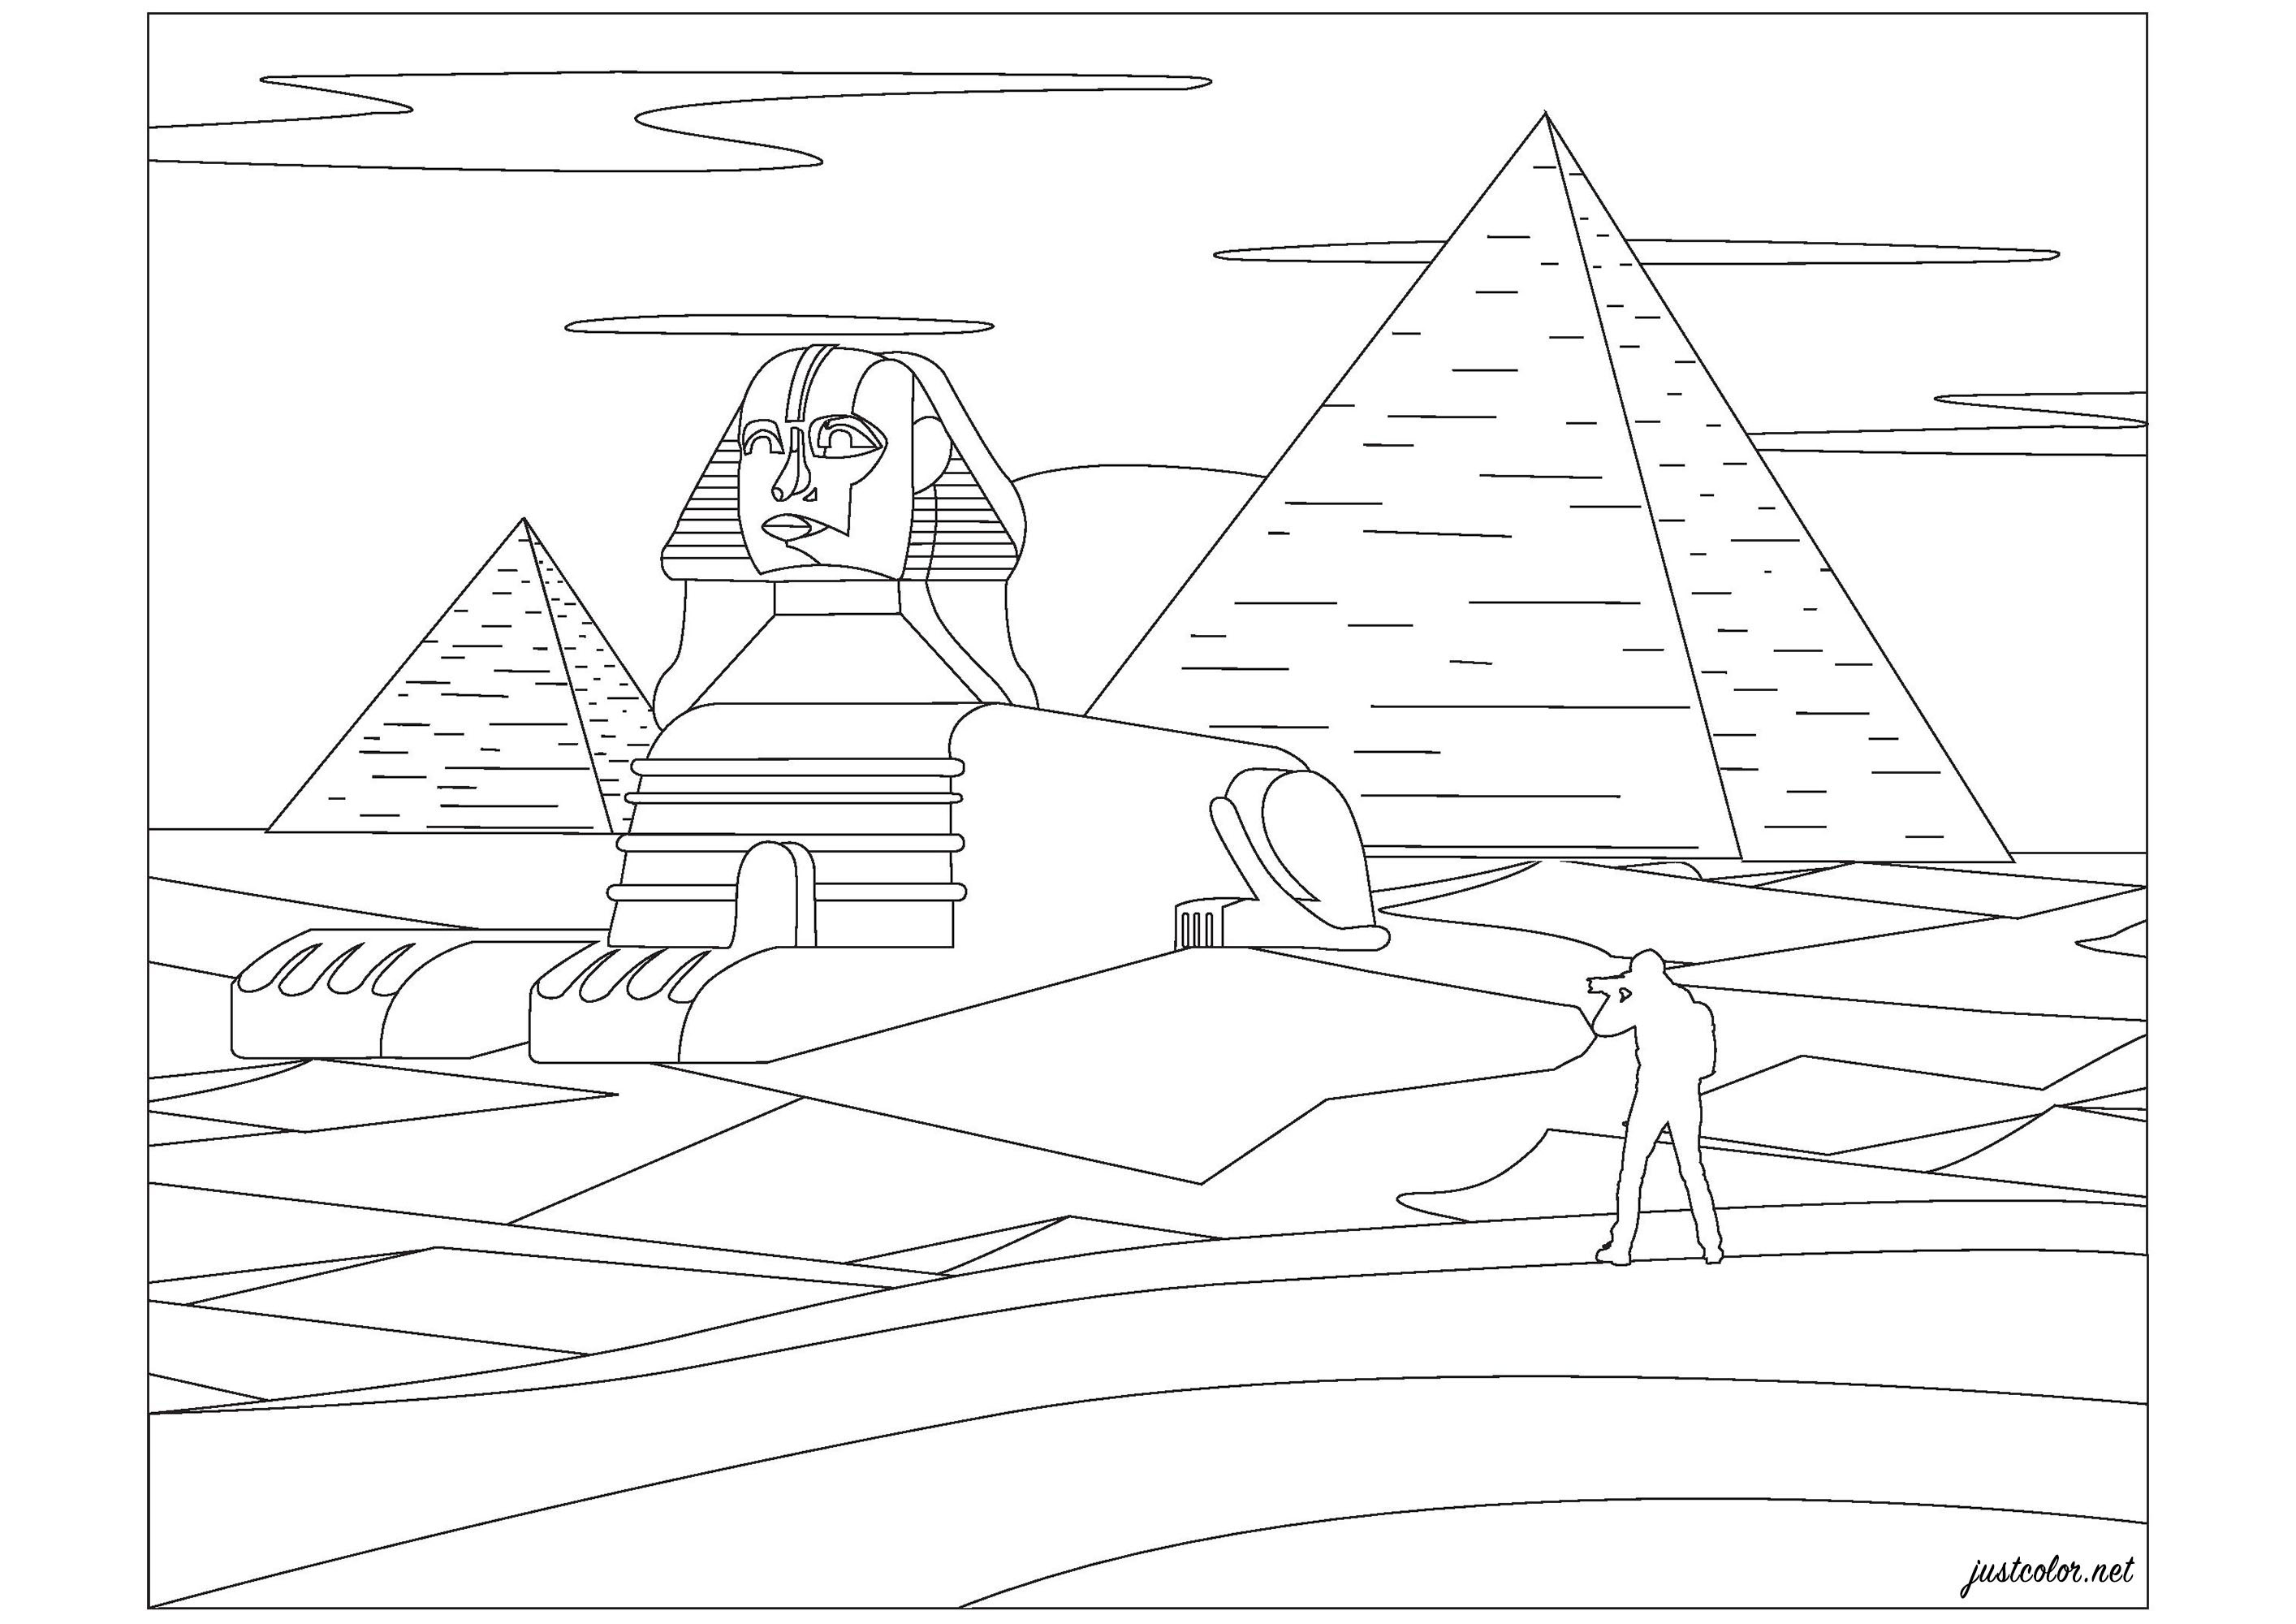 Pyramids of Giza and the Sphinx